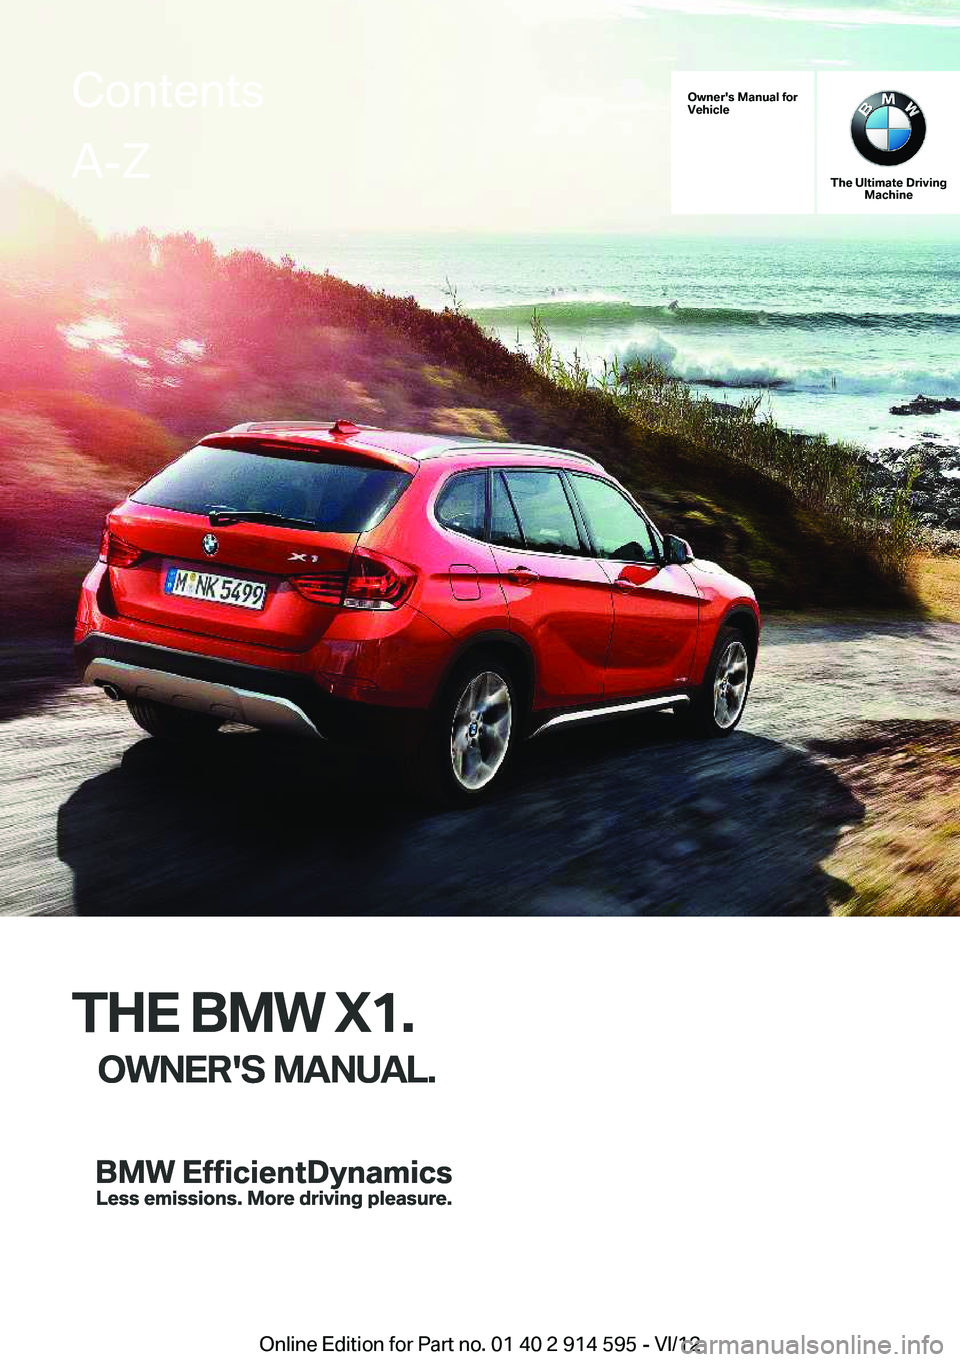 BMW X1 XDRIVE 28I 2013  Owners Manual Owner's Manual for
Vehicle
THE BMW X1.
OWNER'S MANUAL.
The Ultimate Driving Machine
THE BMW X1.
OWNER'S MANUAL.
ContentsA-Z
Online Edition for Part no. 01 40 2 914 595 - VI/12    